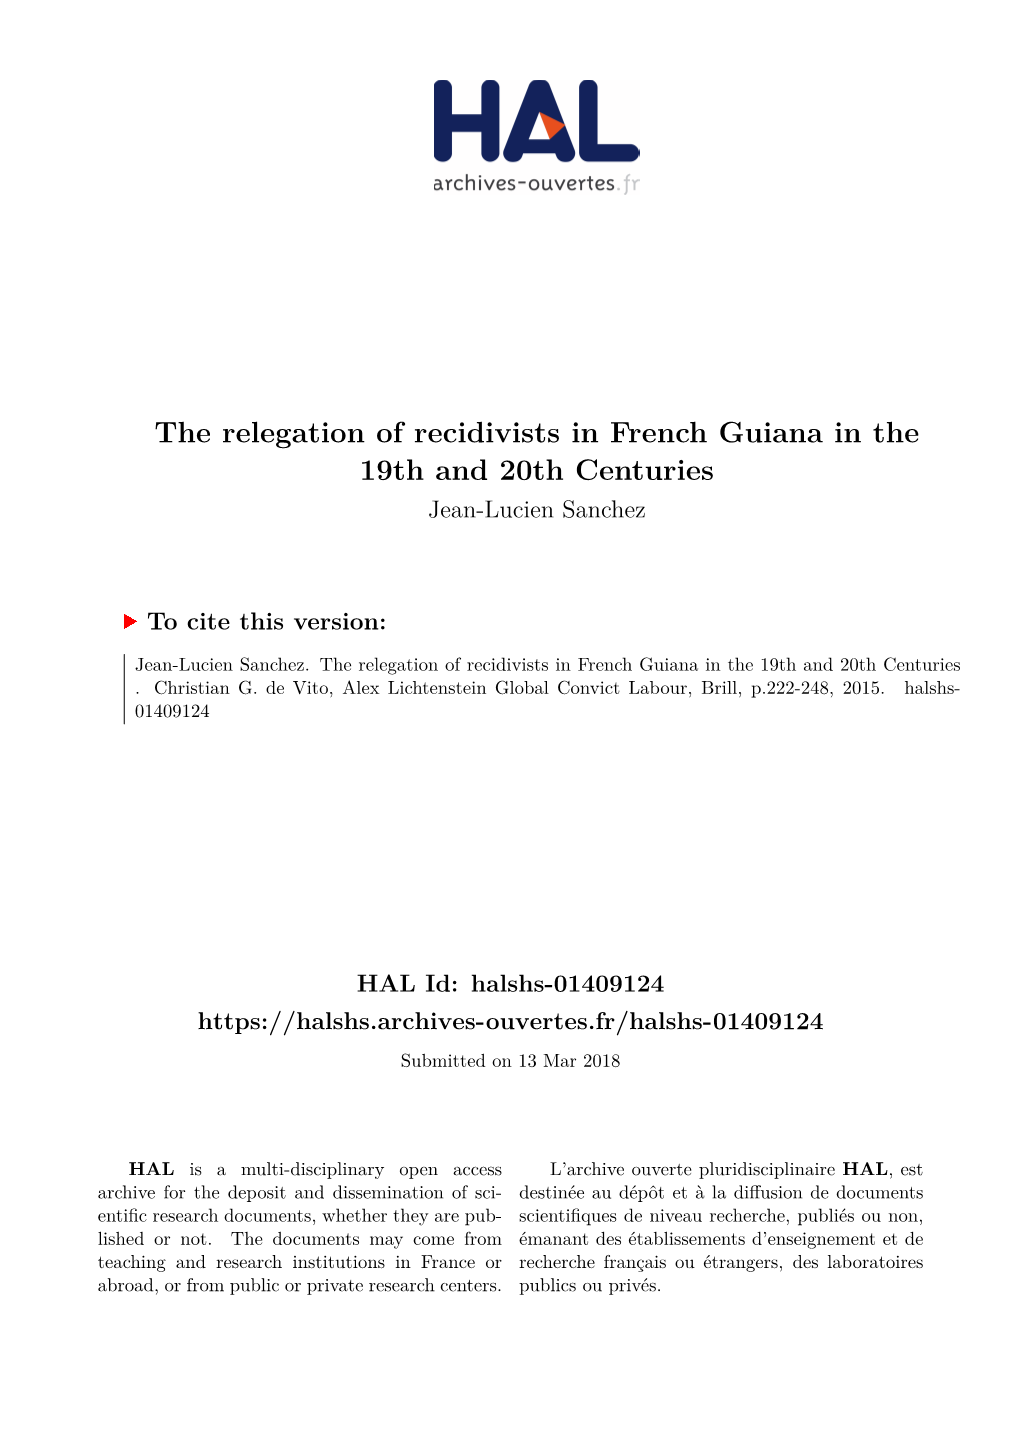 The Relegation of Recidivists in French Guiana in the 19Th and 20Th Centuries Jean-Lucien Sanchez